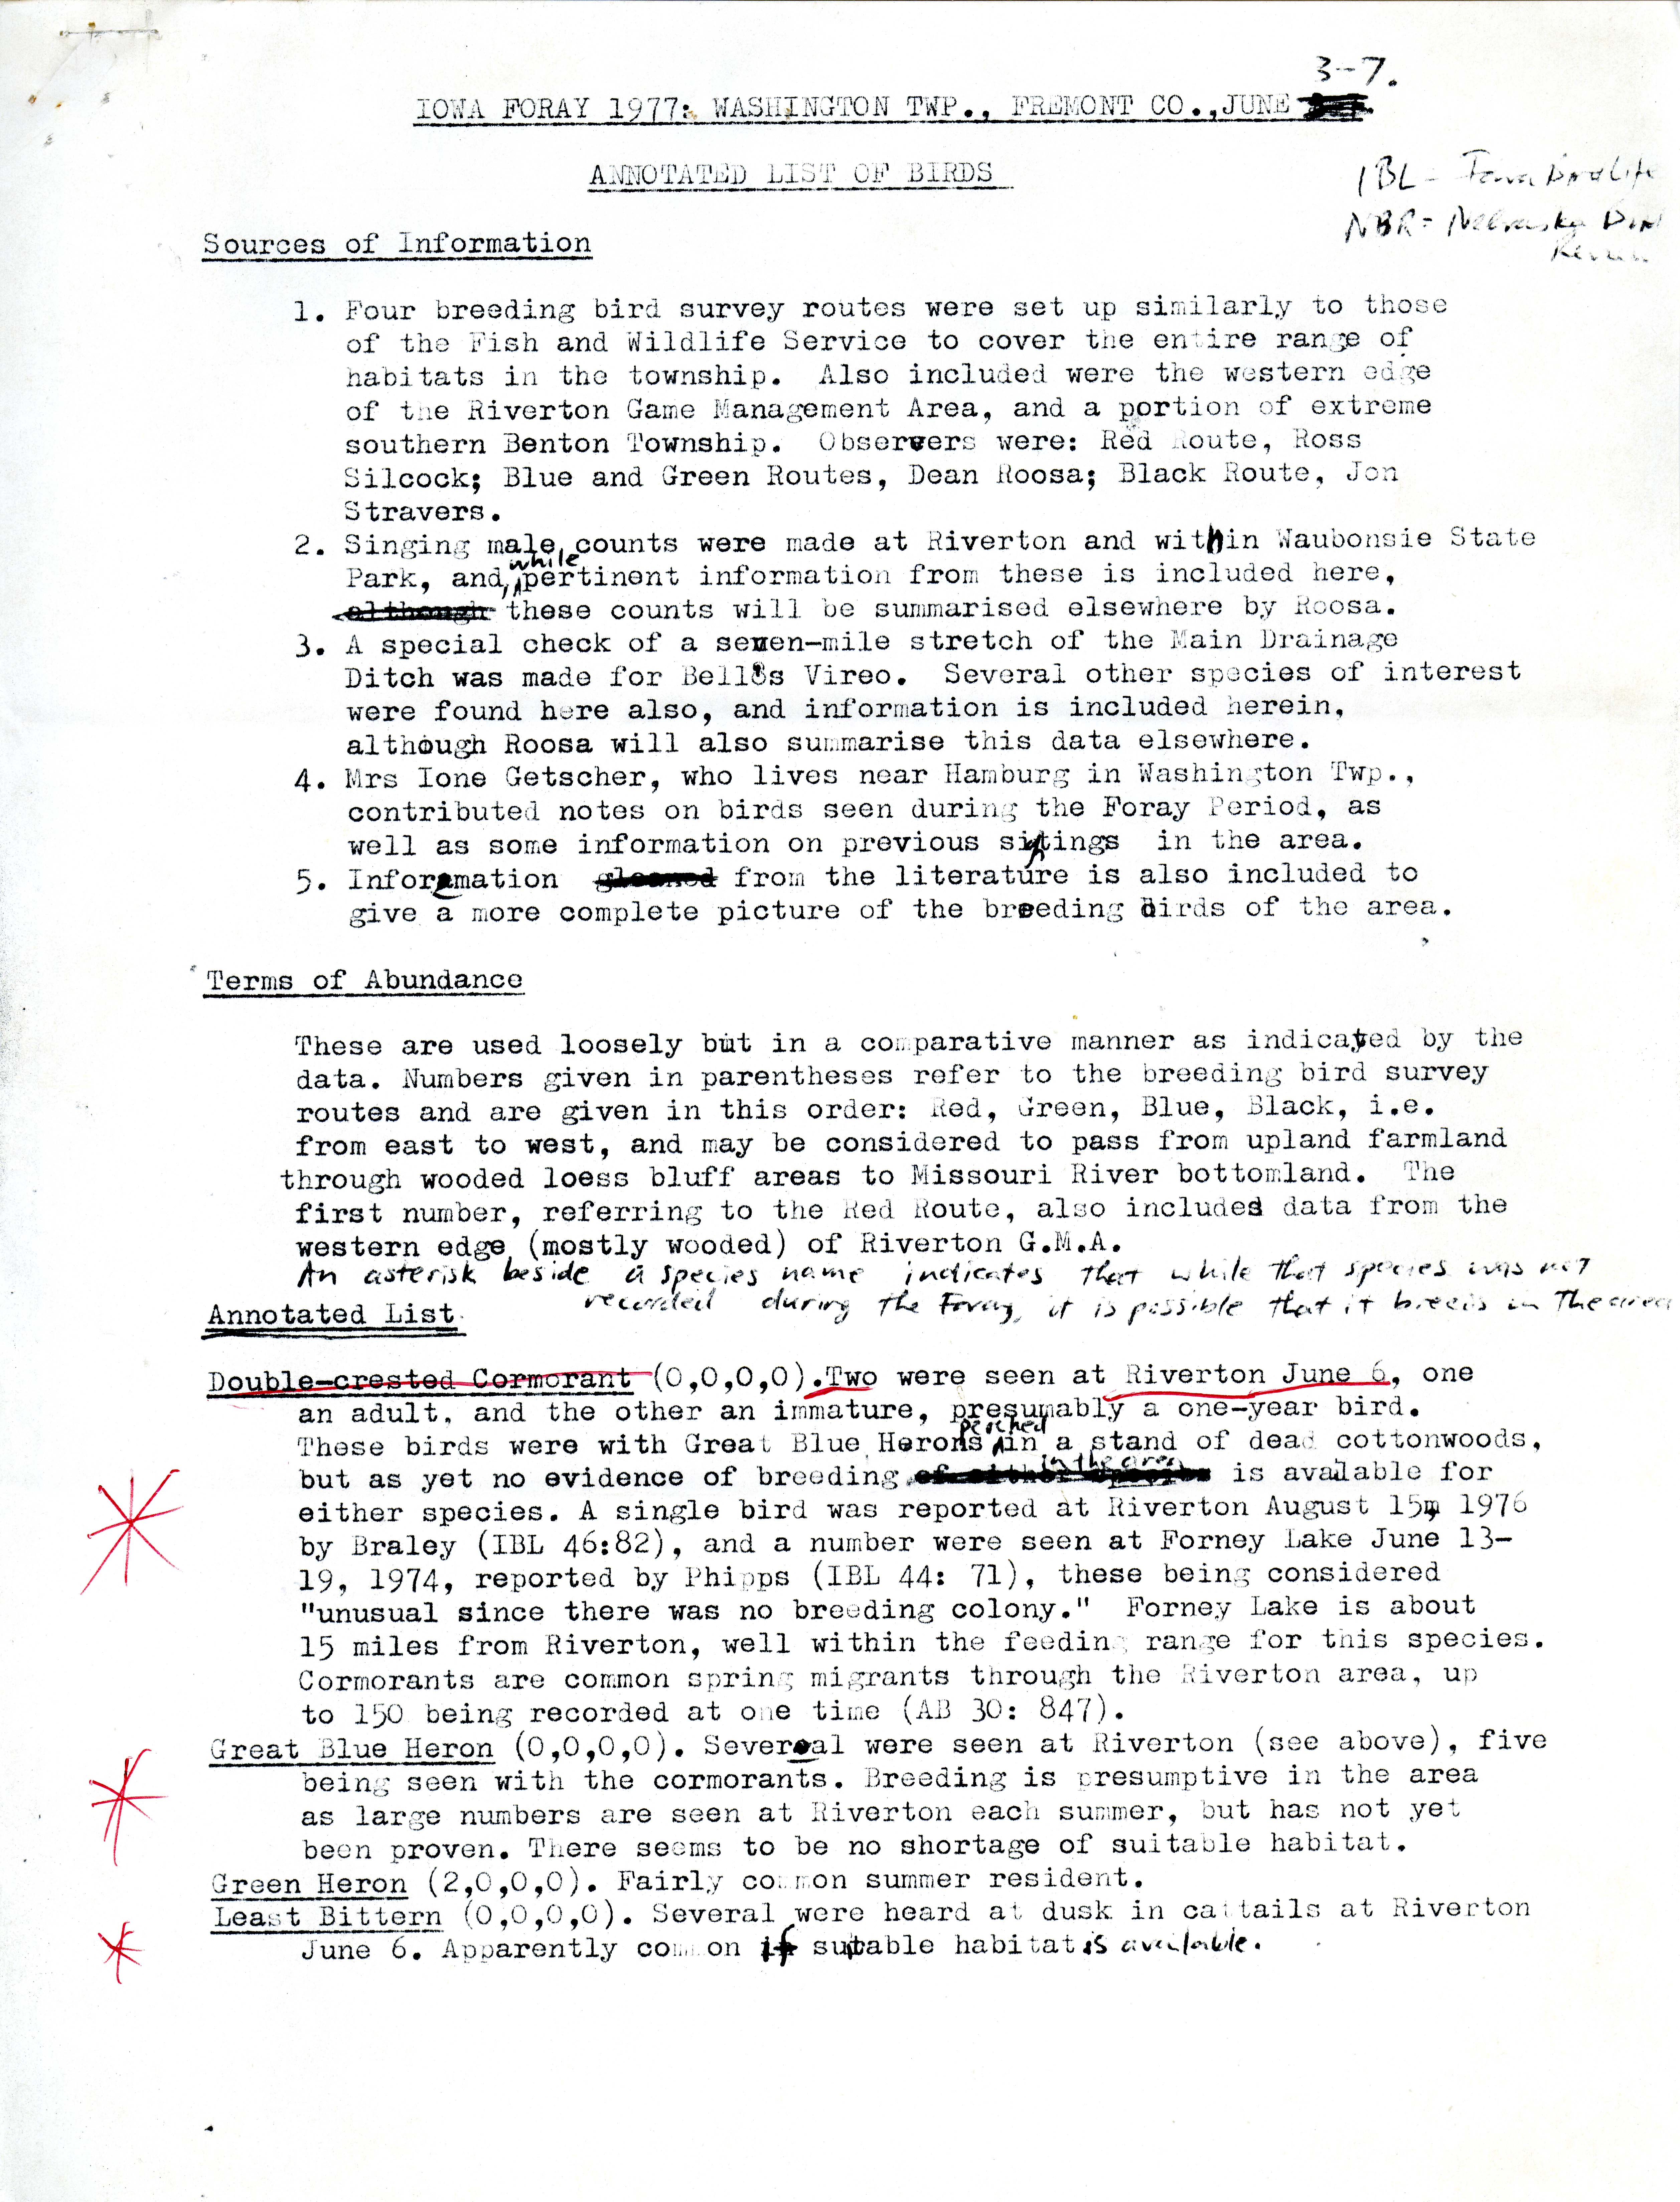 Iowa foray 1977, Washington Township, Fremont County, June 3-7, annotated list of birds